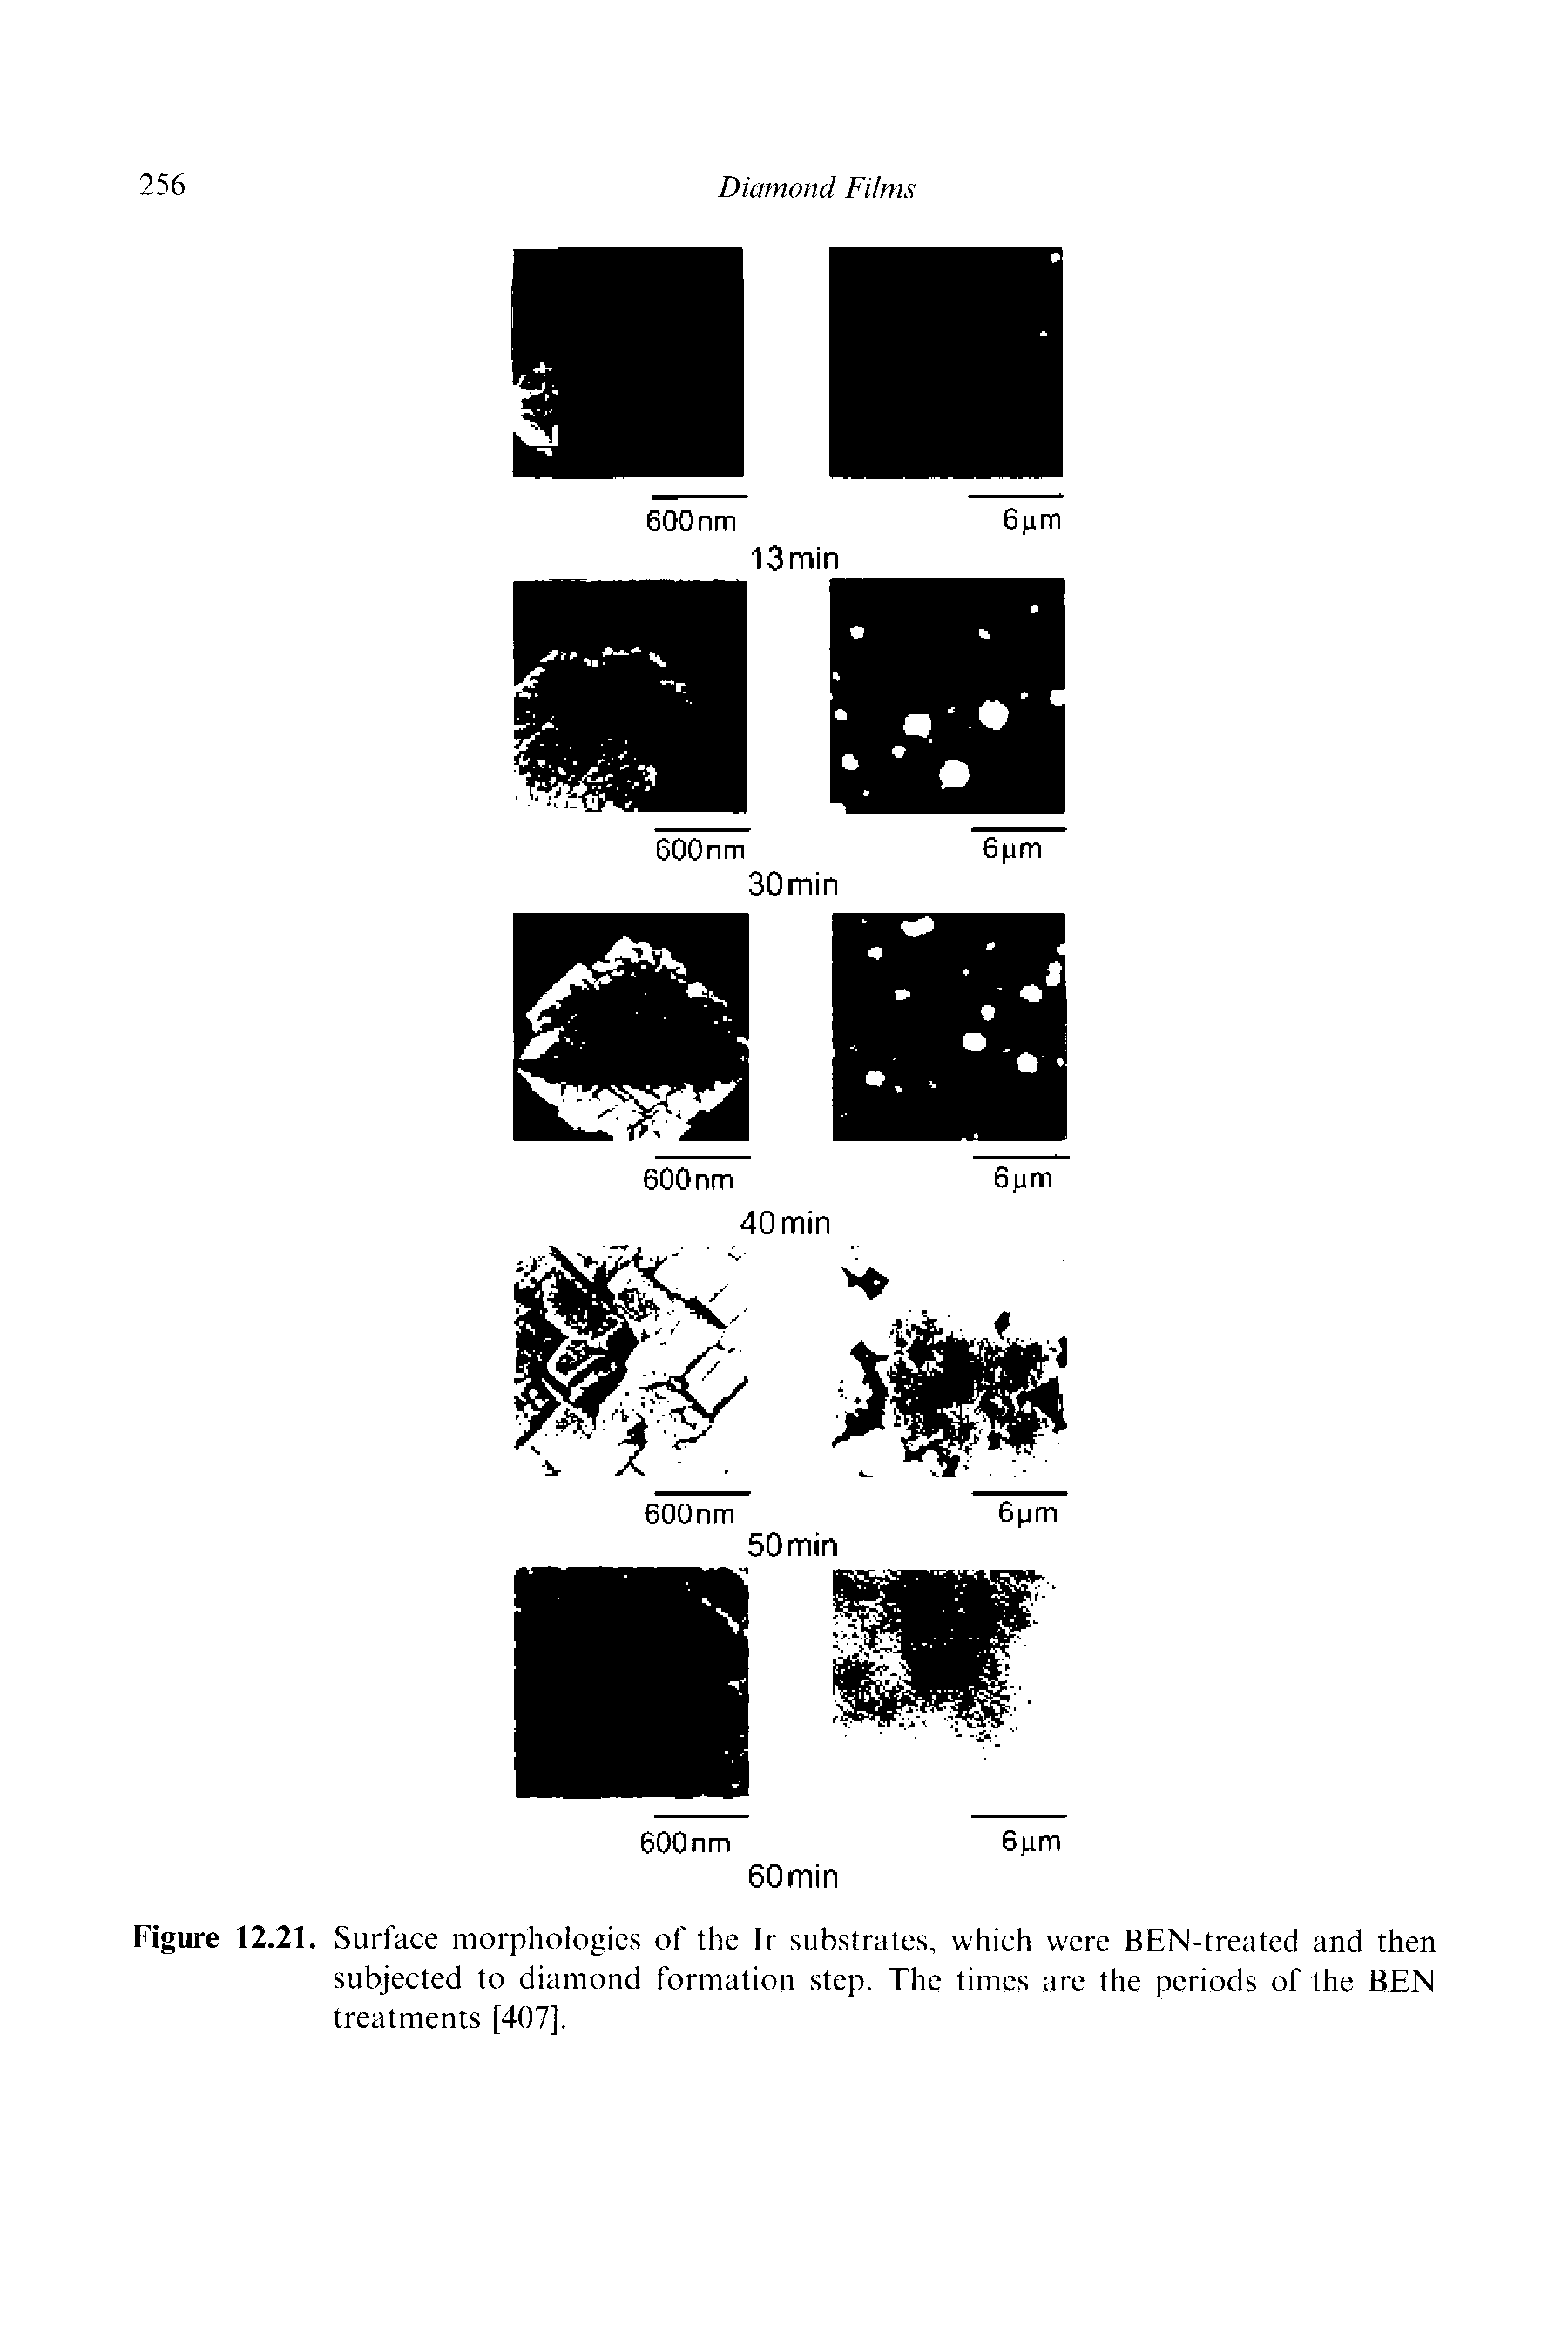 Figure 12.21. Surface morphologies of the Ir substrates, which were BEN-treated and then subjected to diamond formation step. The times are the periods of the BEN treatments [407].